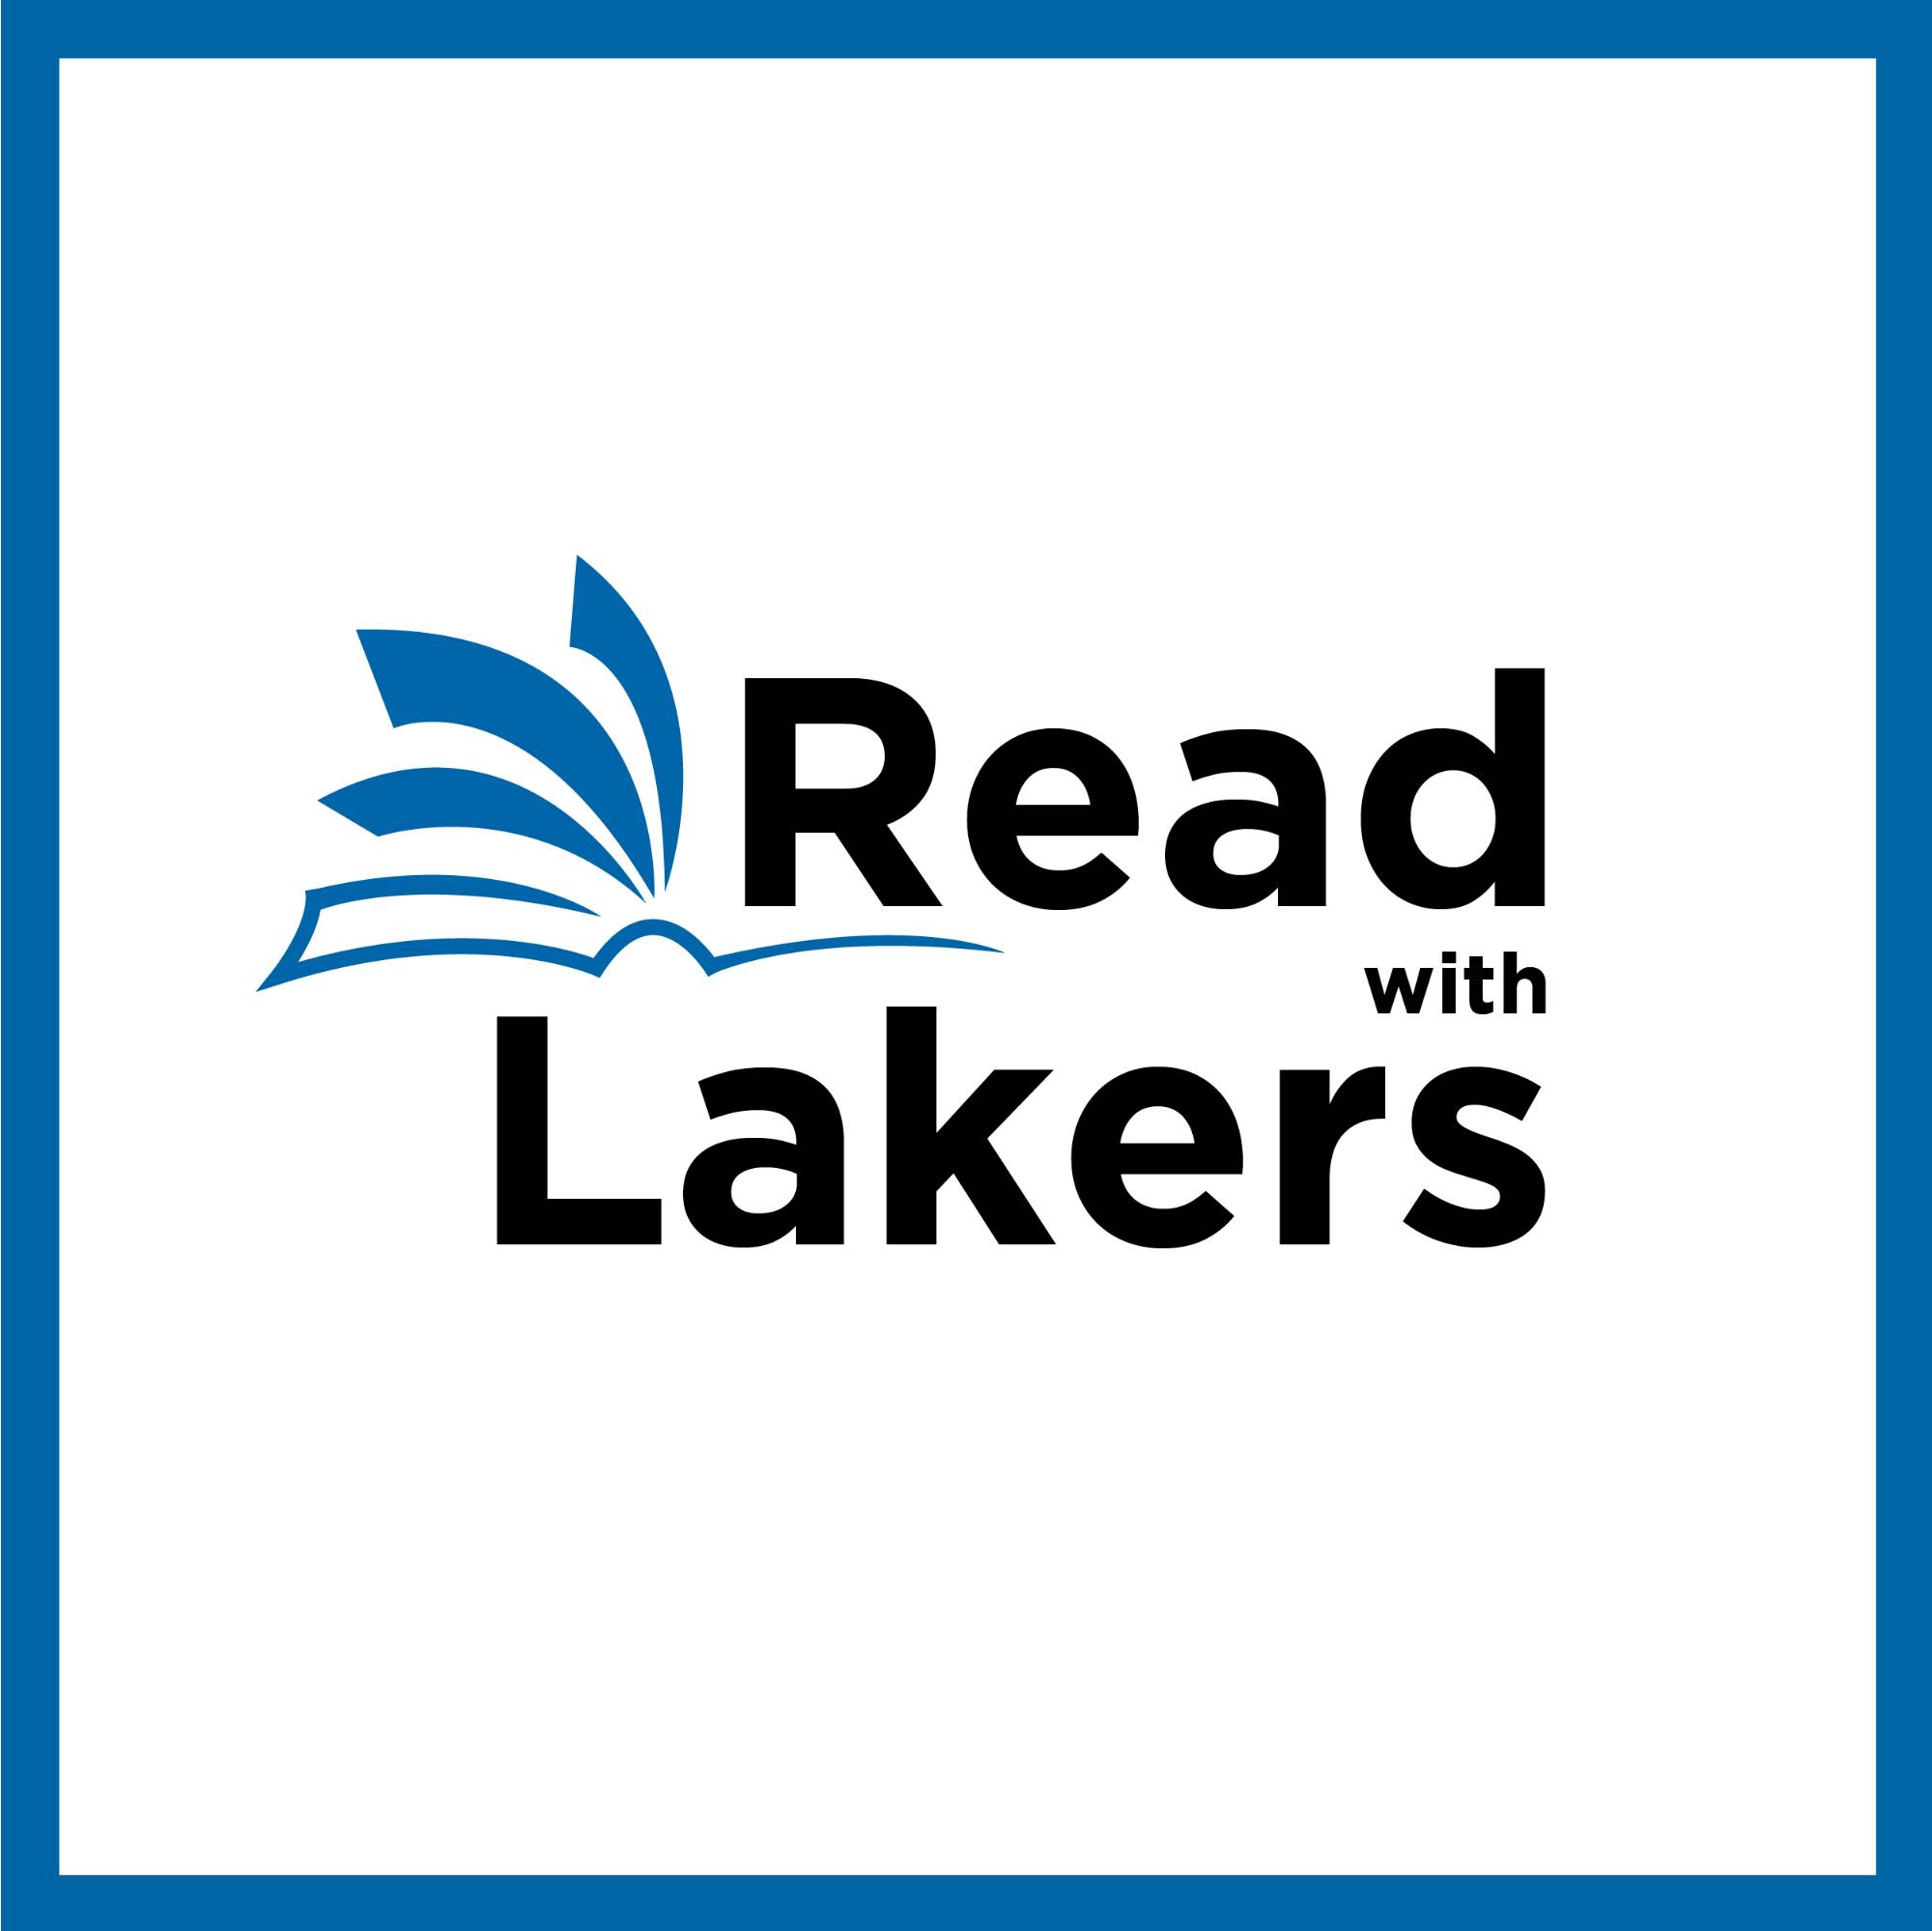 Read with Lakers logo